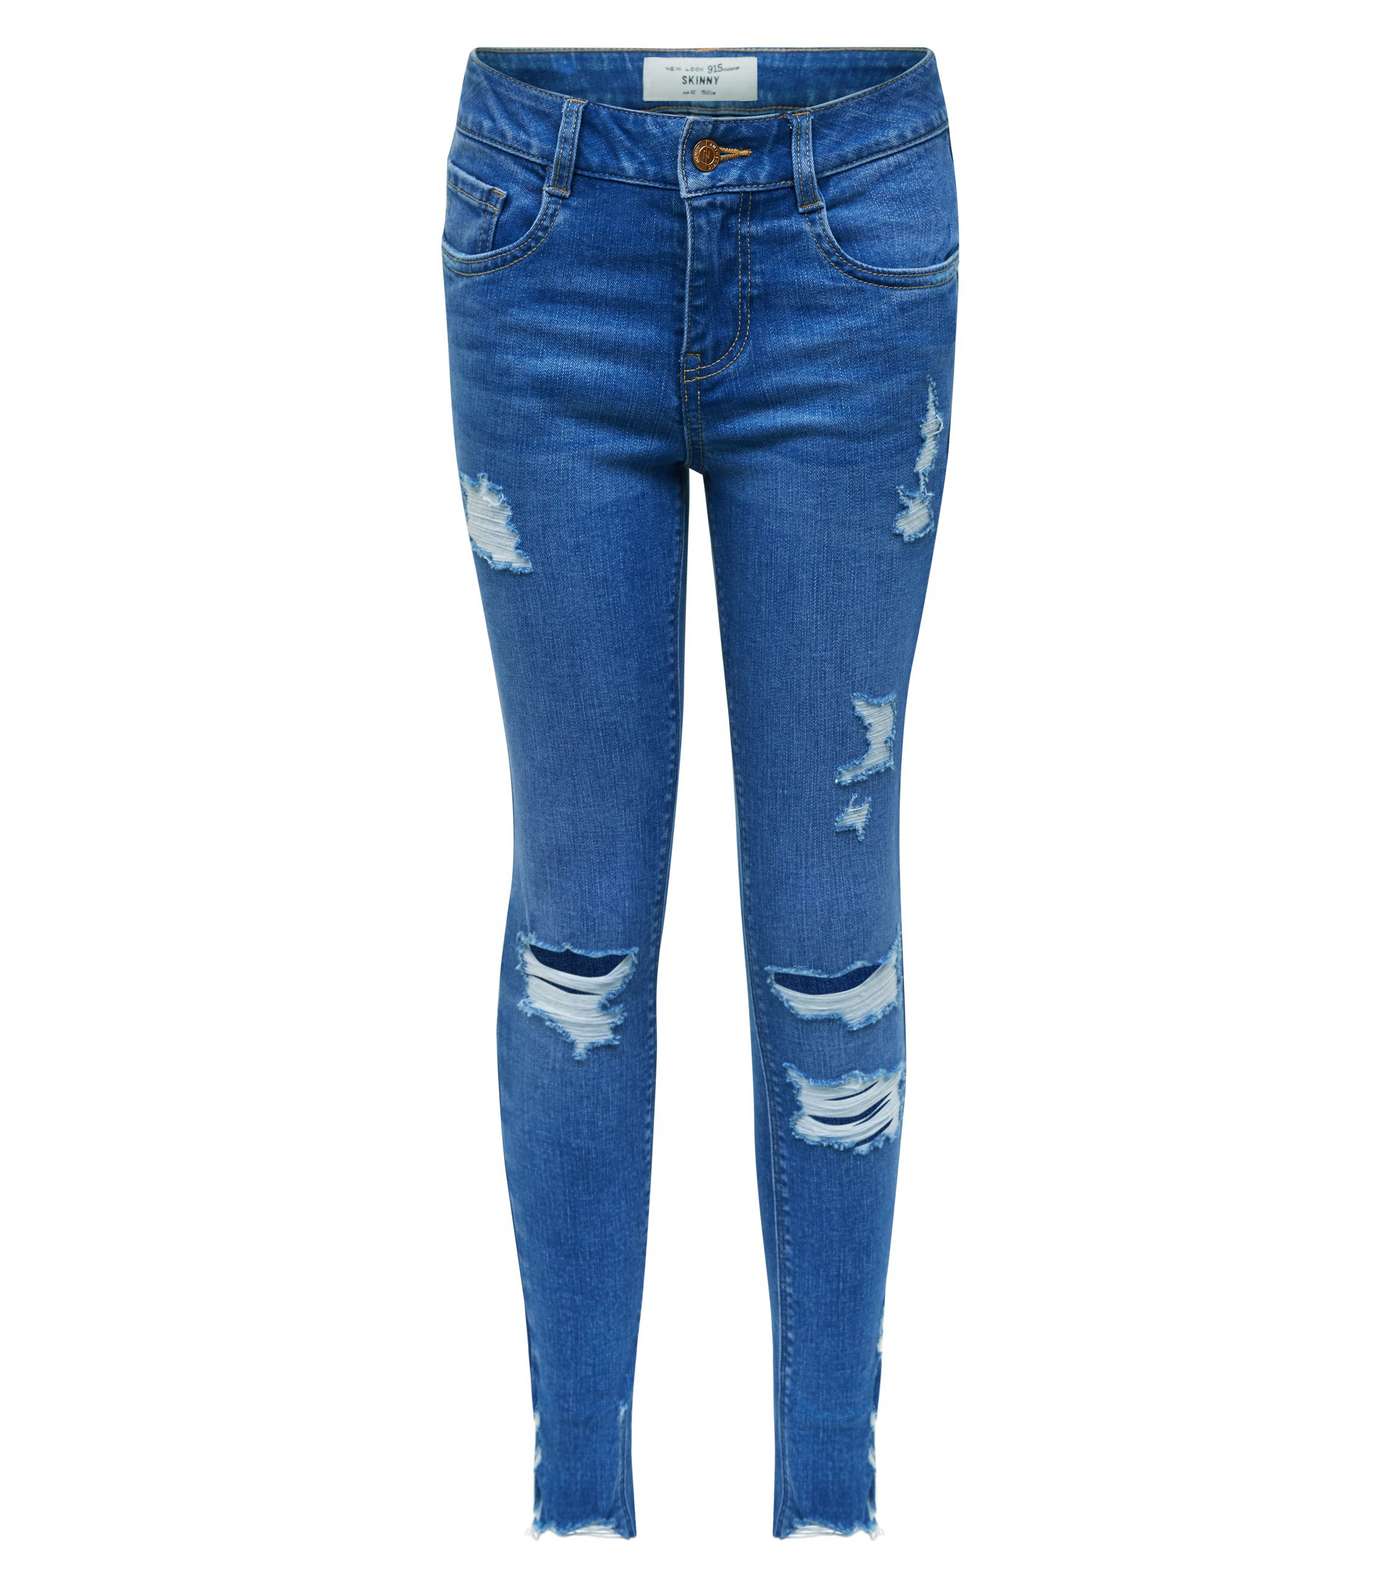 Girls Bright Blue Ripped Skinny Jeans Image 4